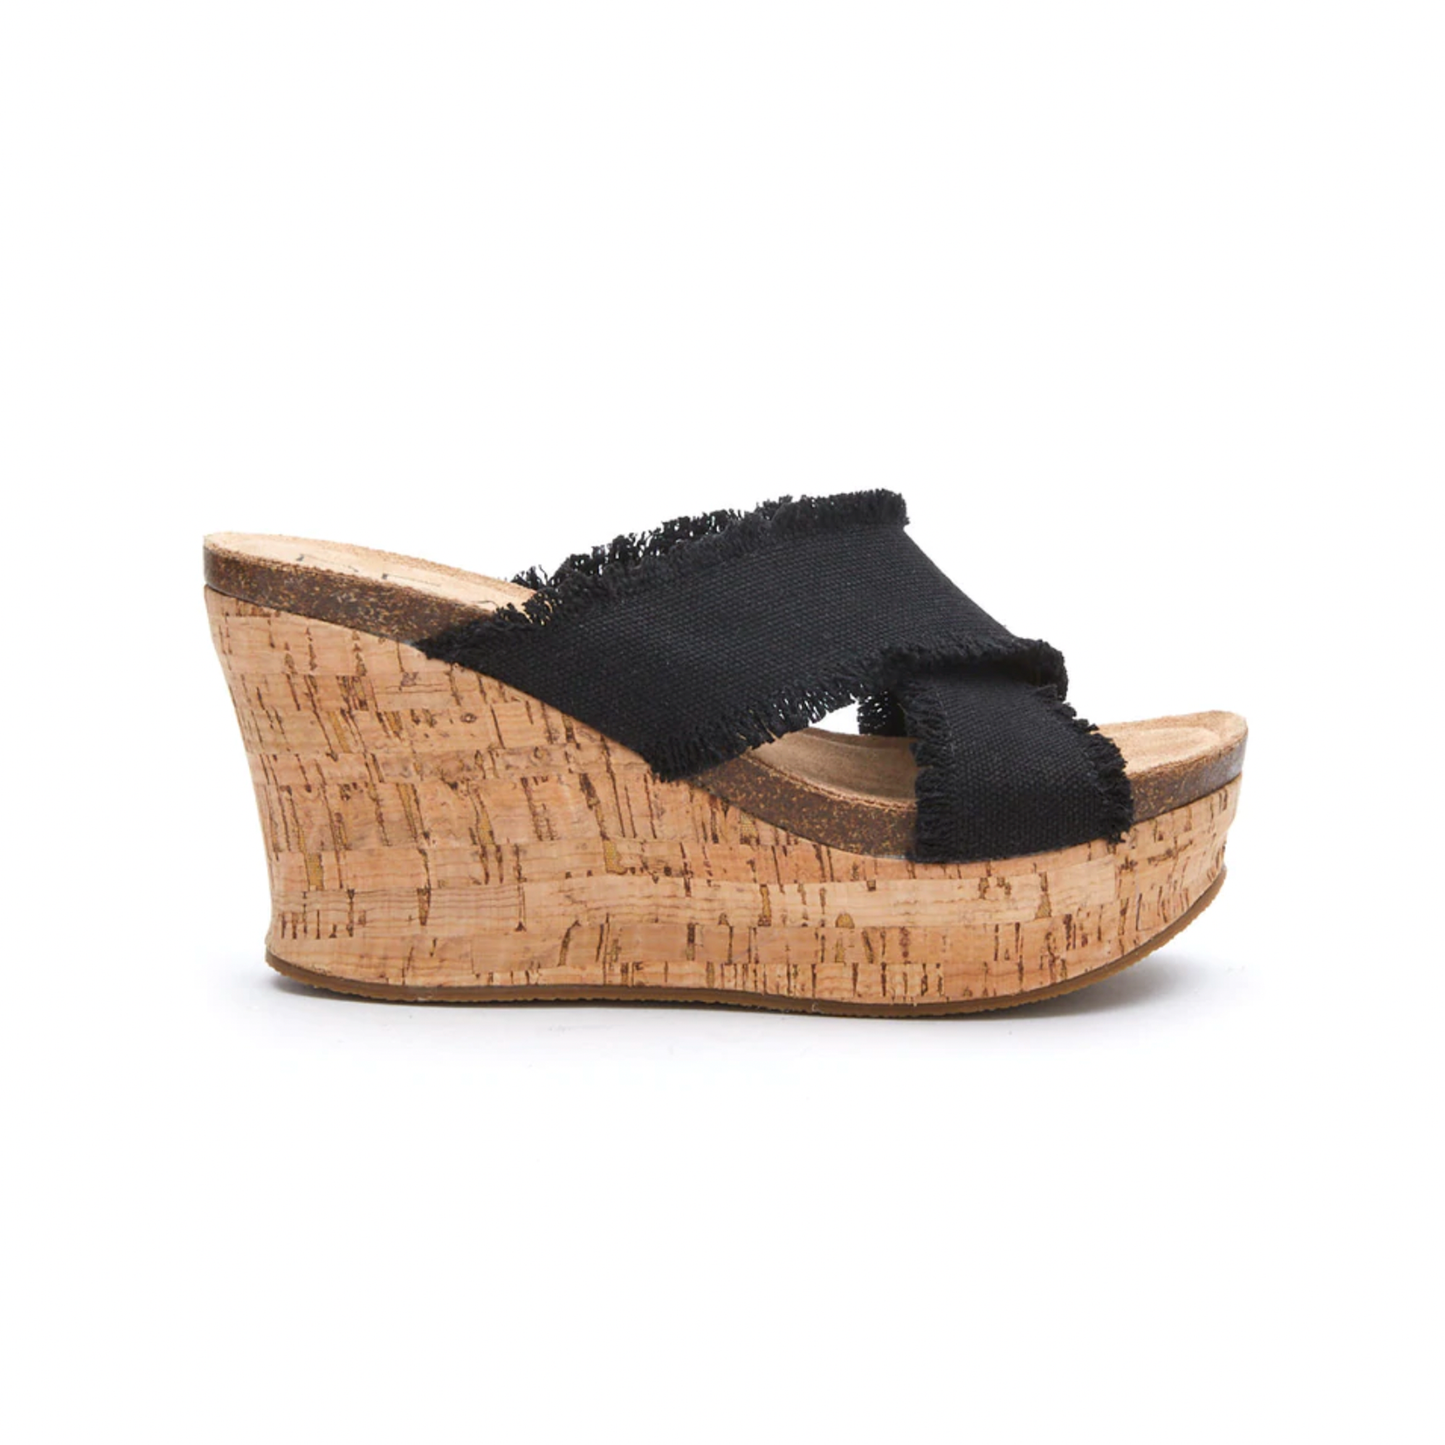 Sea Salt Wedge Sandal. Wander freely looking fabulous with this casual wedge sandal